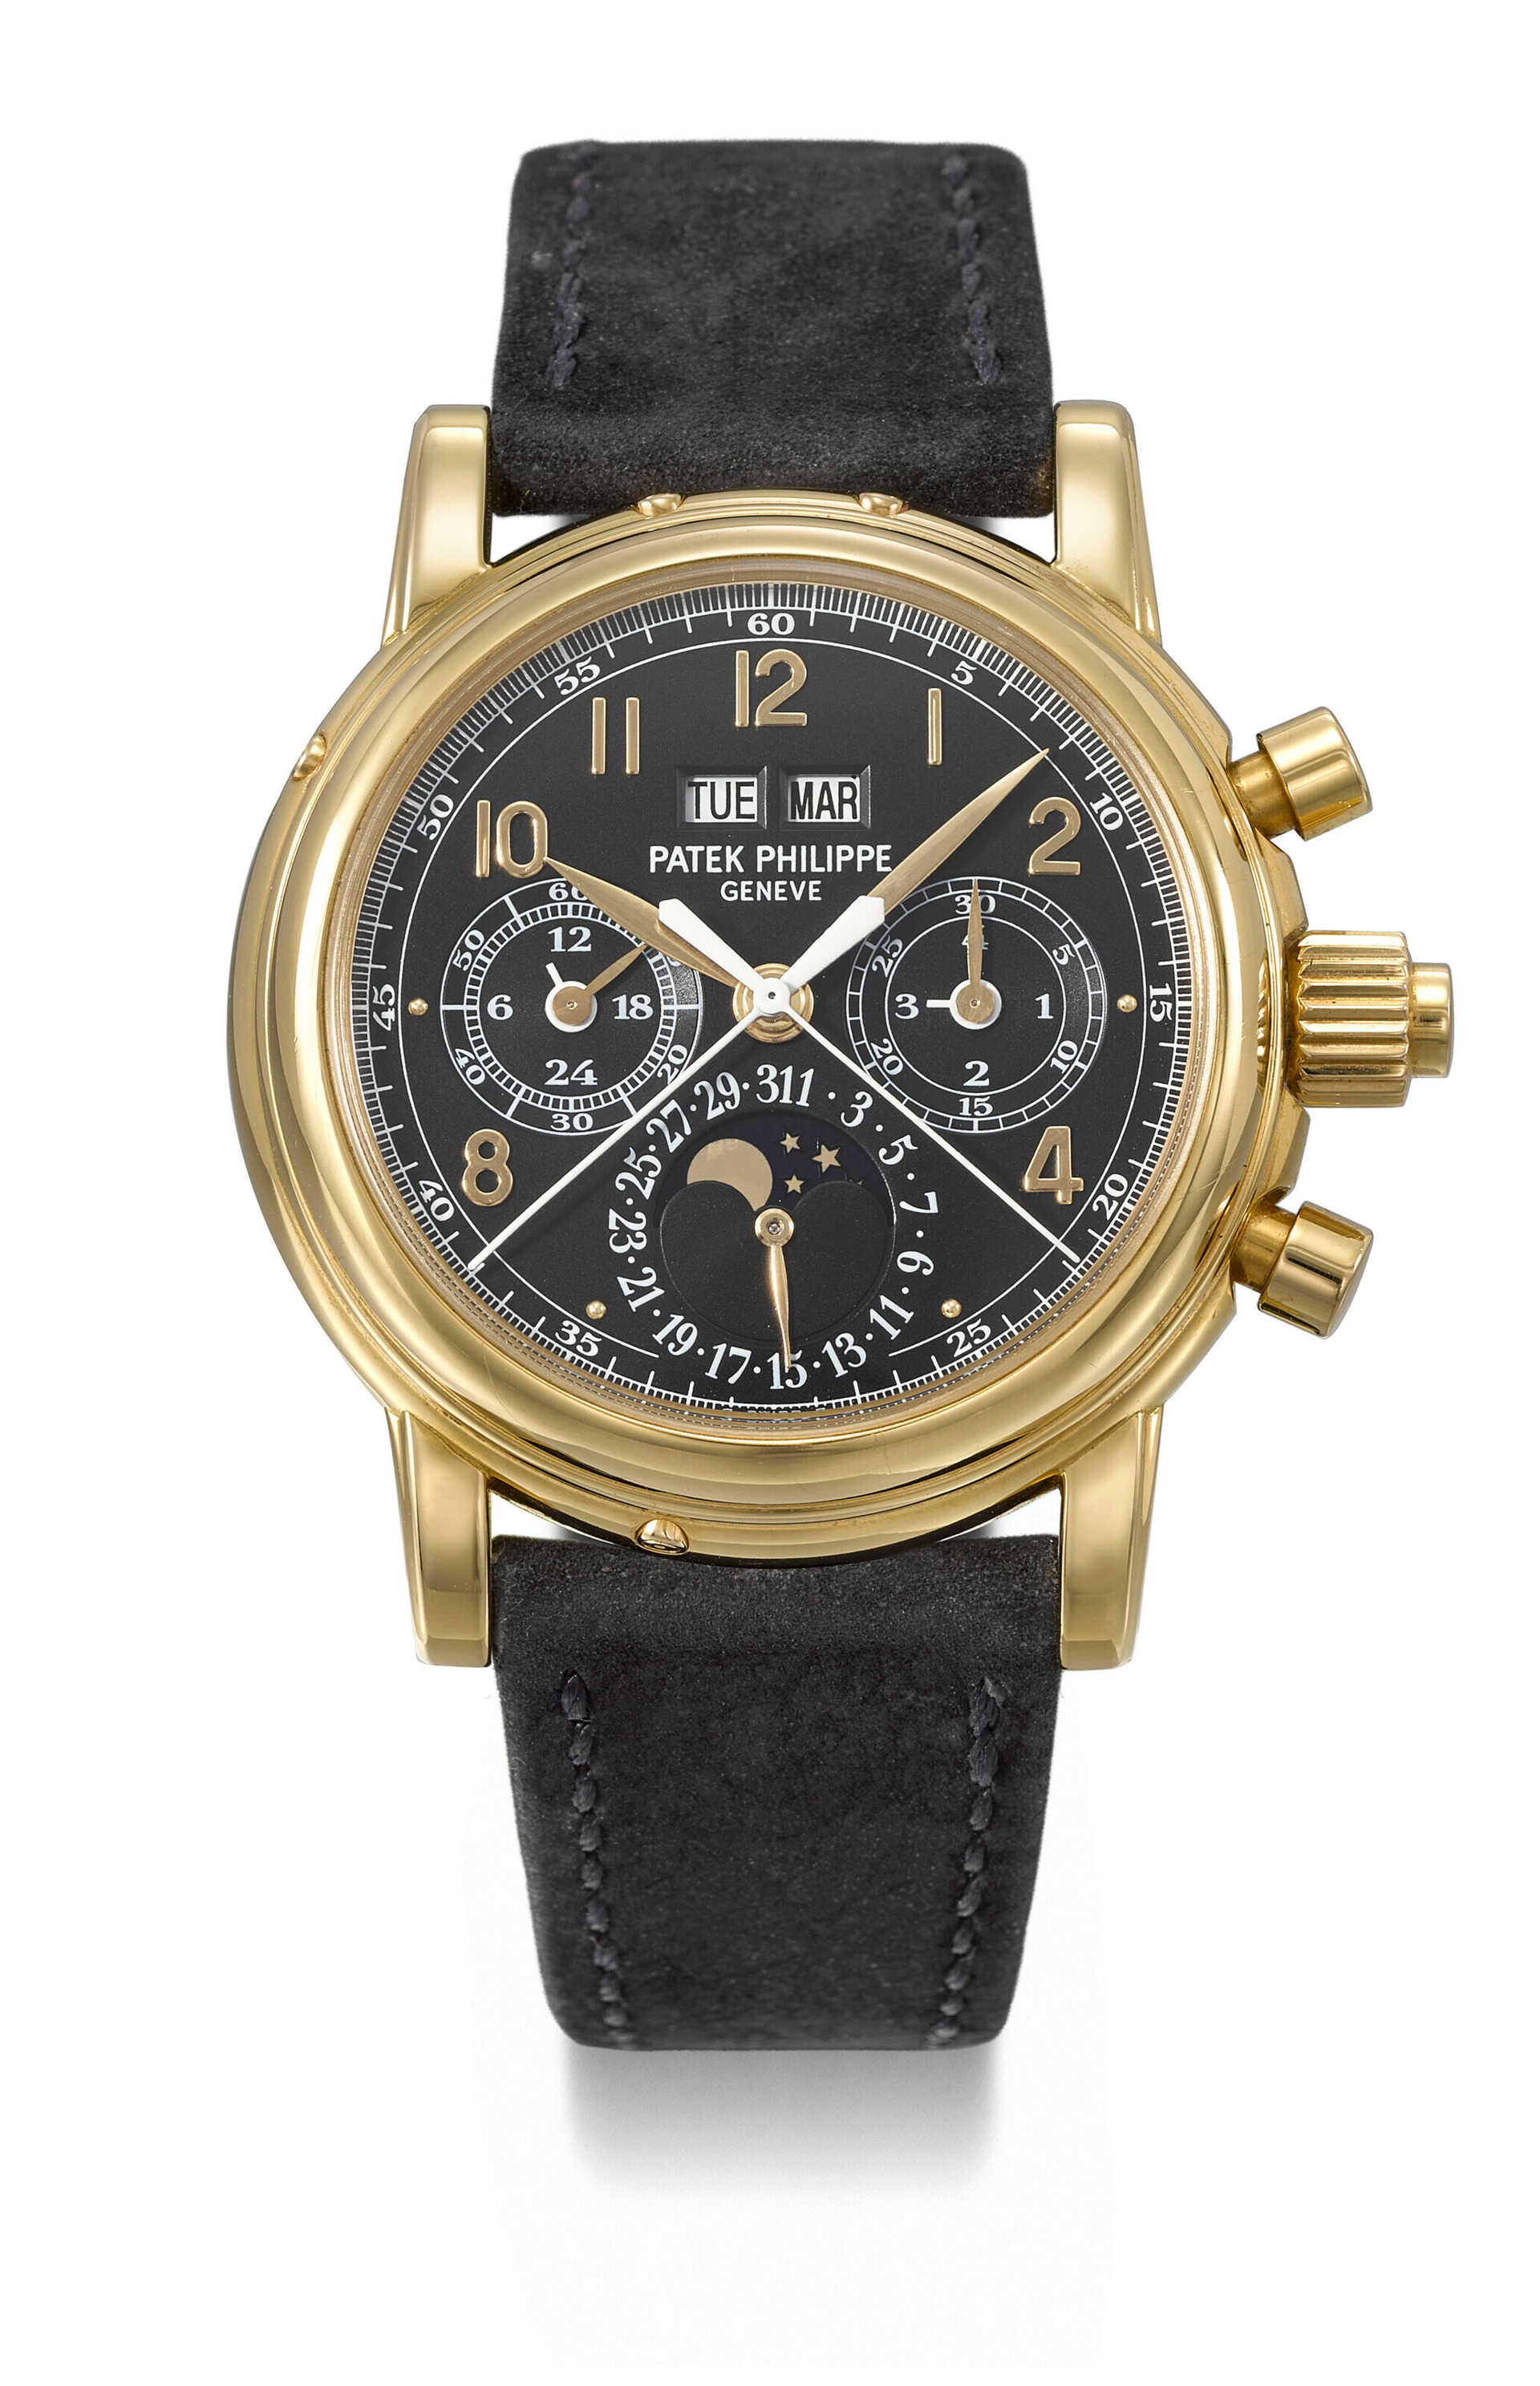 PATEK PHILIPPE. A VERY RARE AND HIGHLY ATTRACTIVE 18K PINK GOLD PERPETUAL CALENDAR SPLIT SECONDS CHRONOGRAPH WRISTWATCH WITH MOON PHASES, 24 HOUR AND LEAP YEAR INDICATION